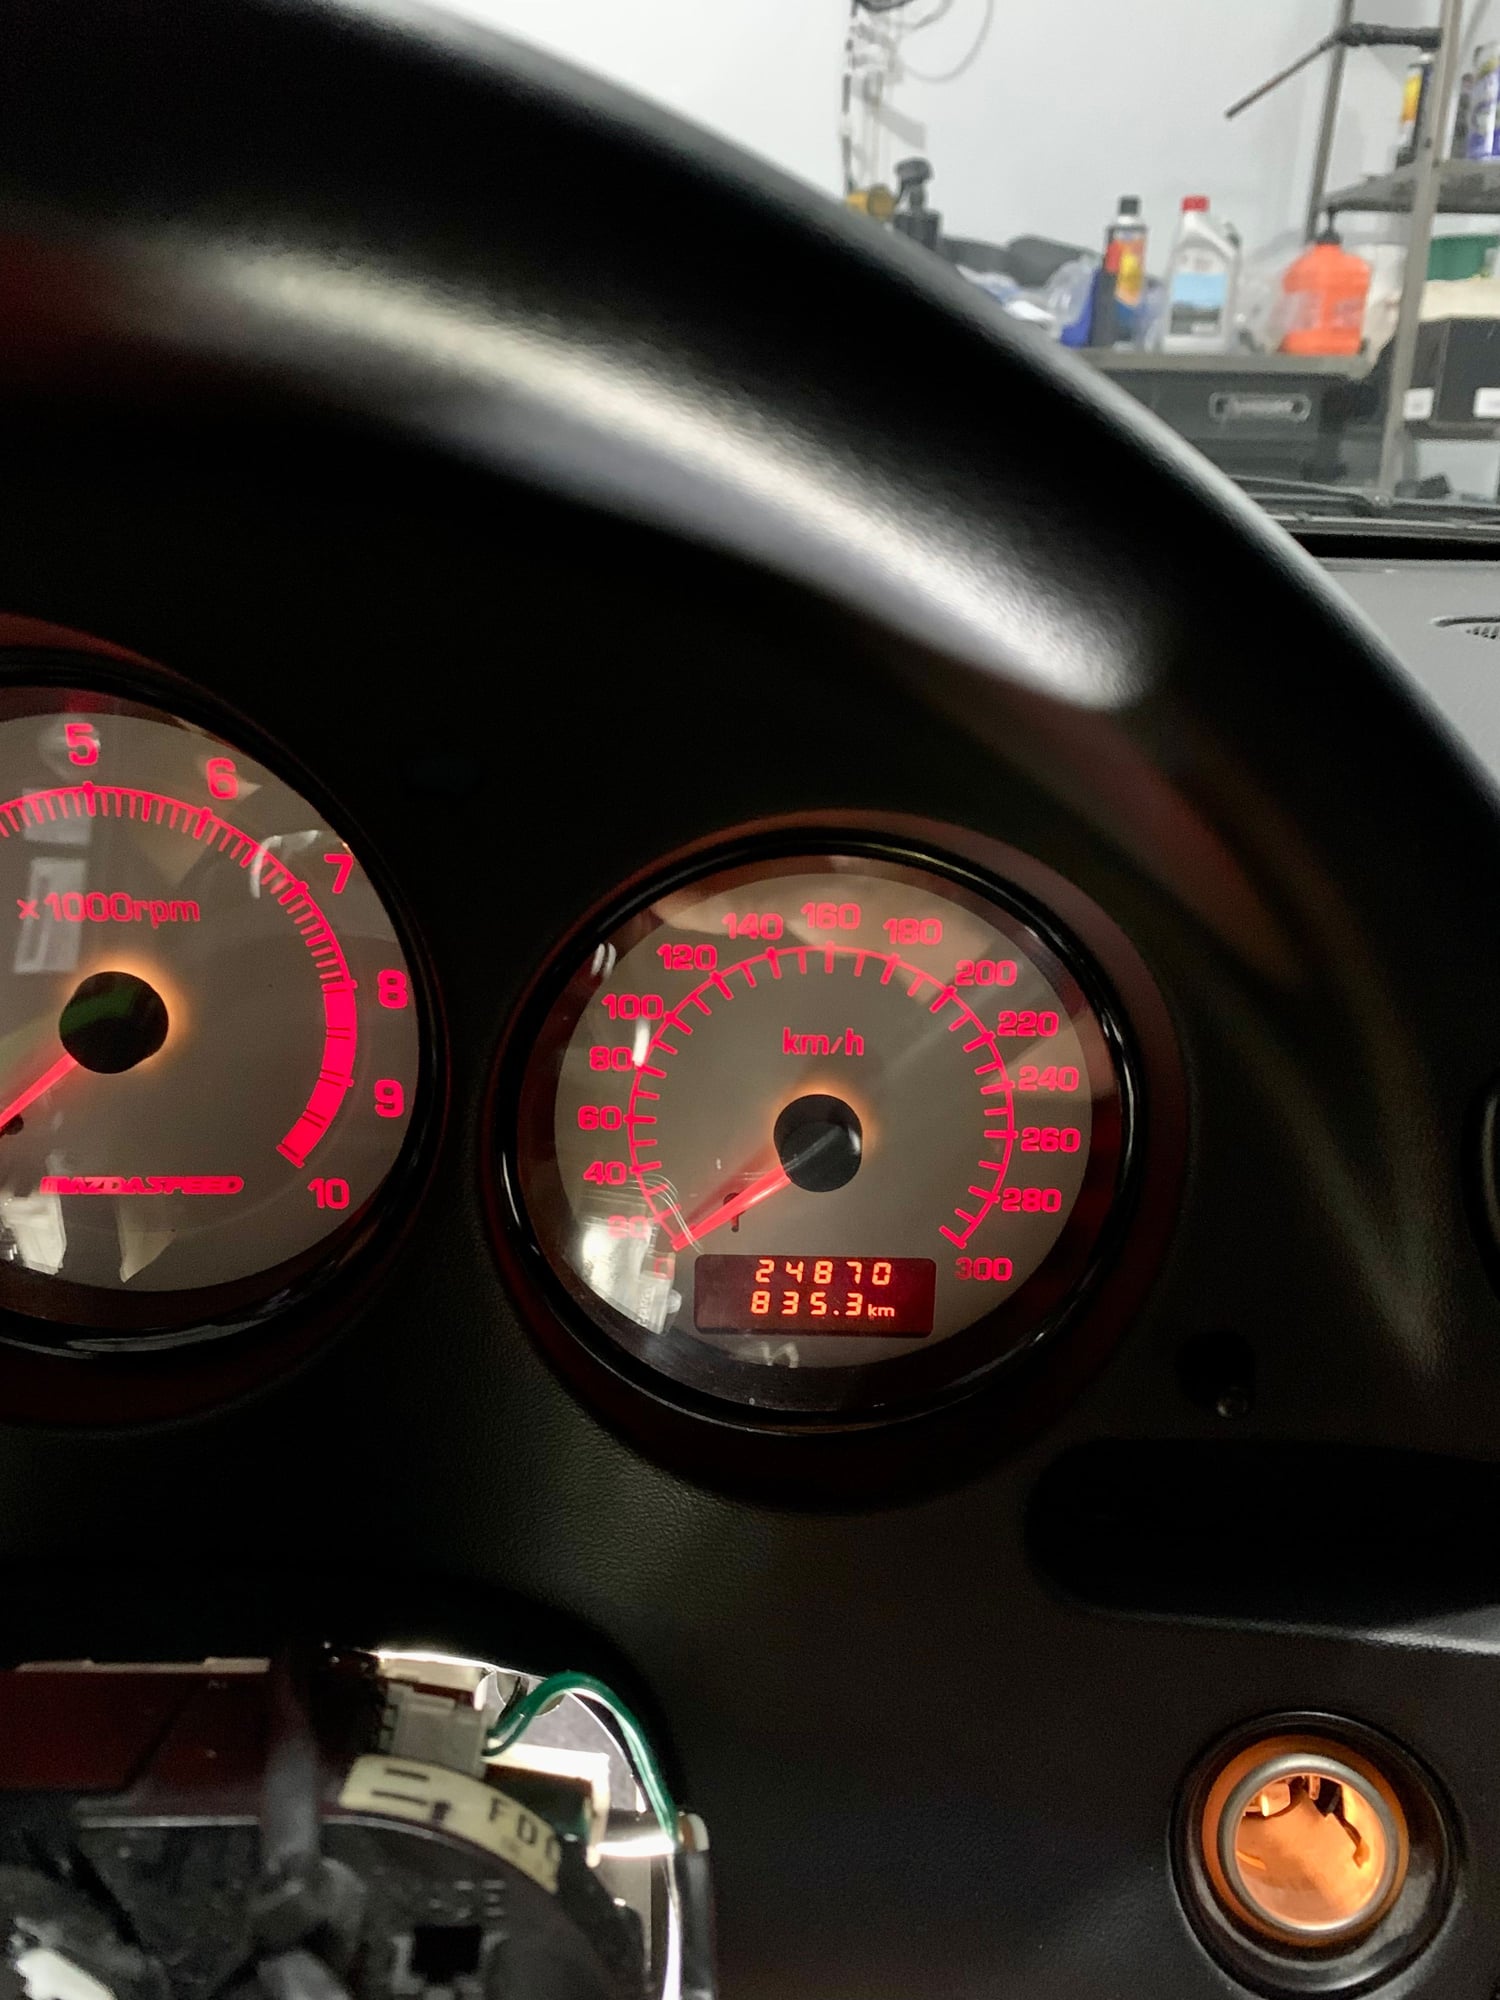 Engine - Electrical - Mazdaspeed Dash and Wheel for Sale - Used - 1993 to 2002 Mazda RX-7 - Allentown, PA 18031, United States